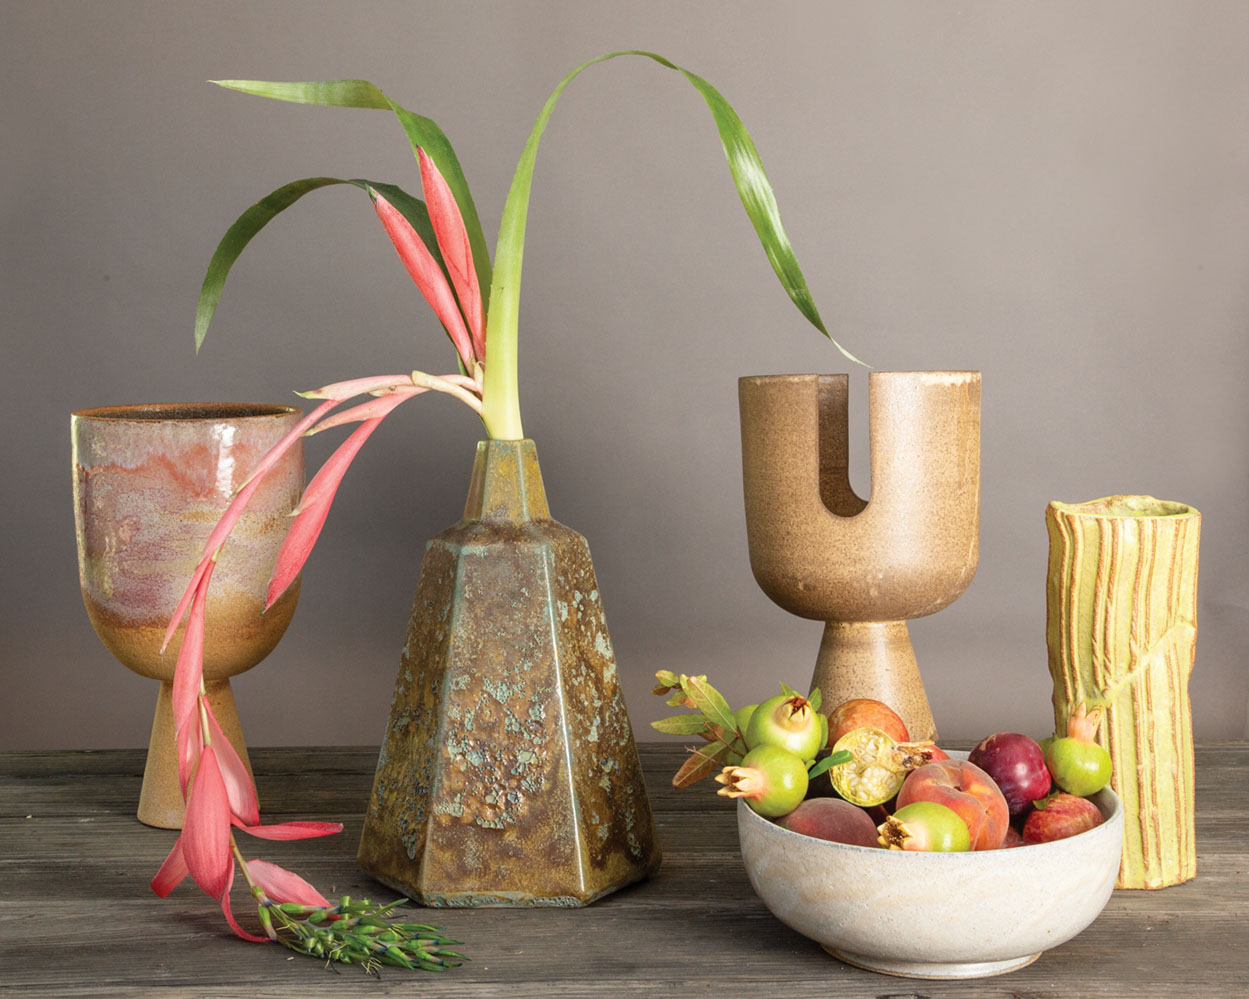 Ceramic vases and bowls by Josh Beckman of FBP Works